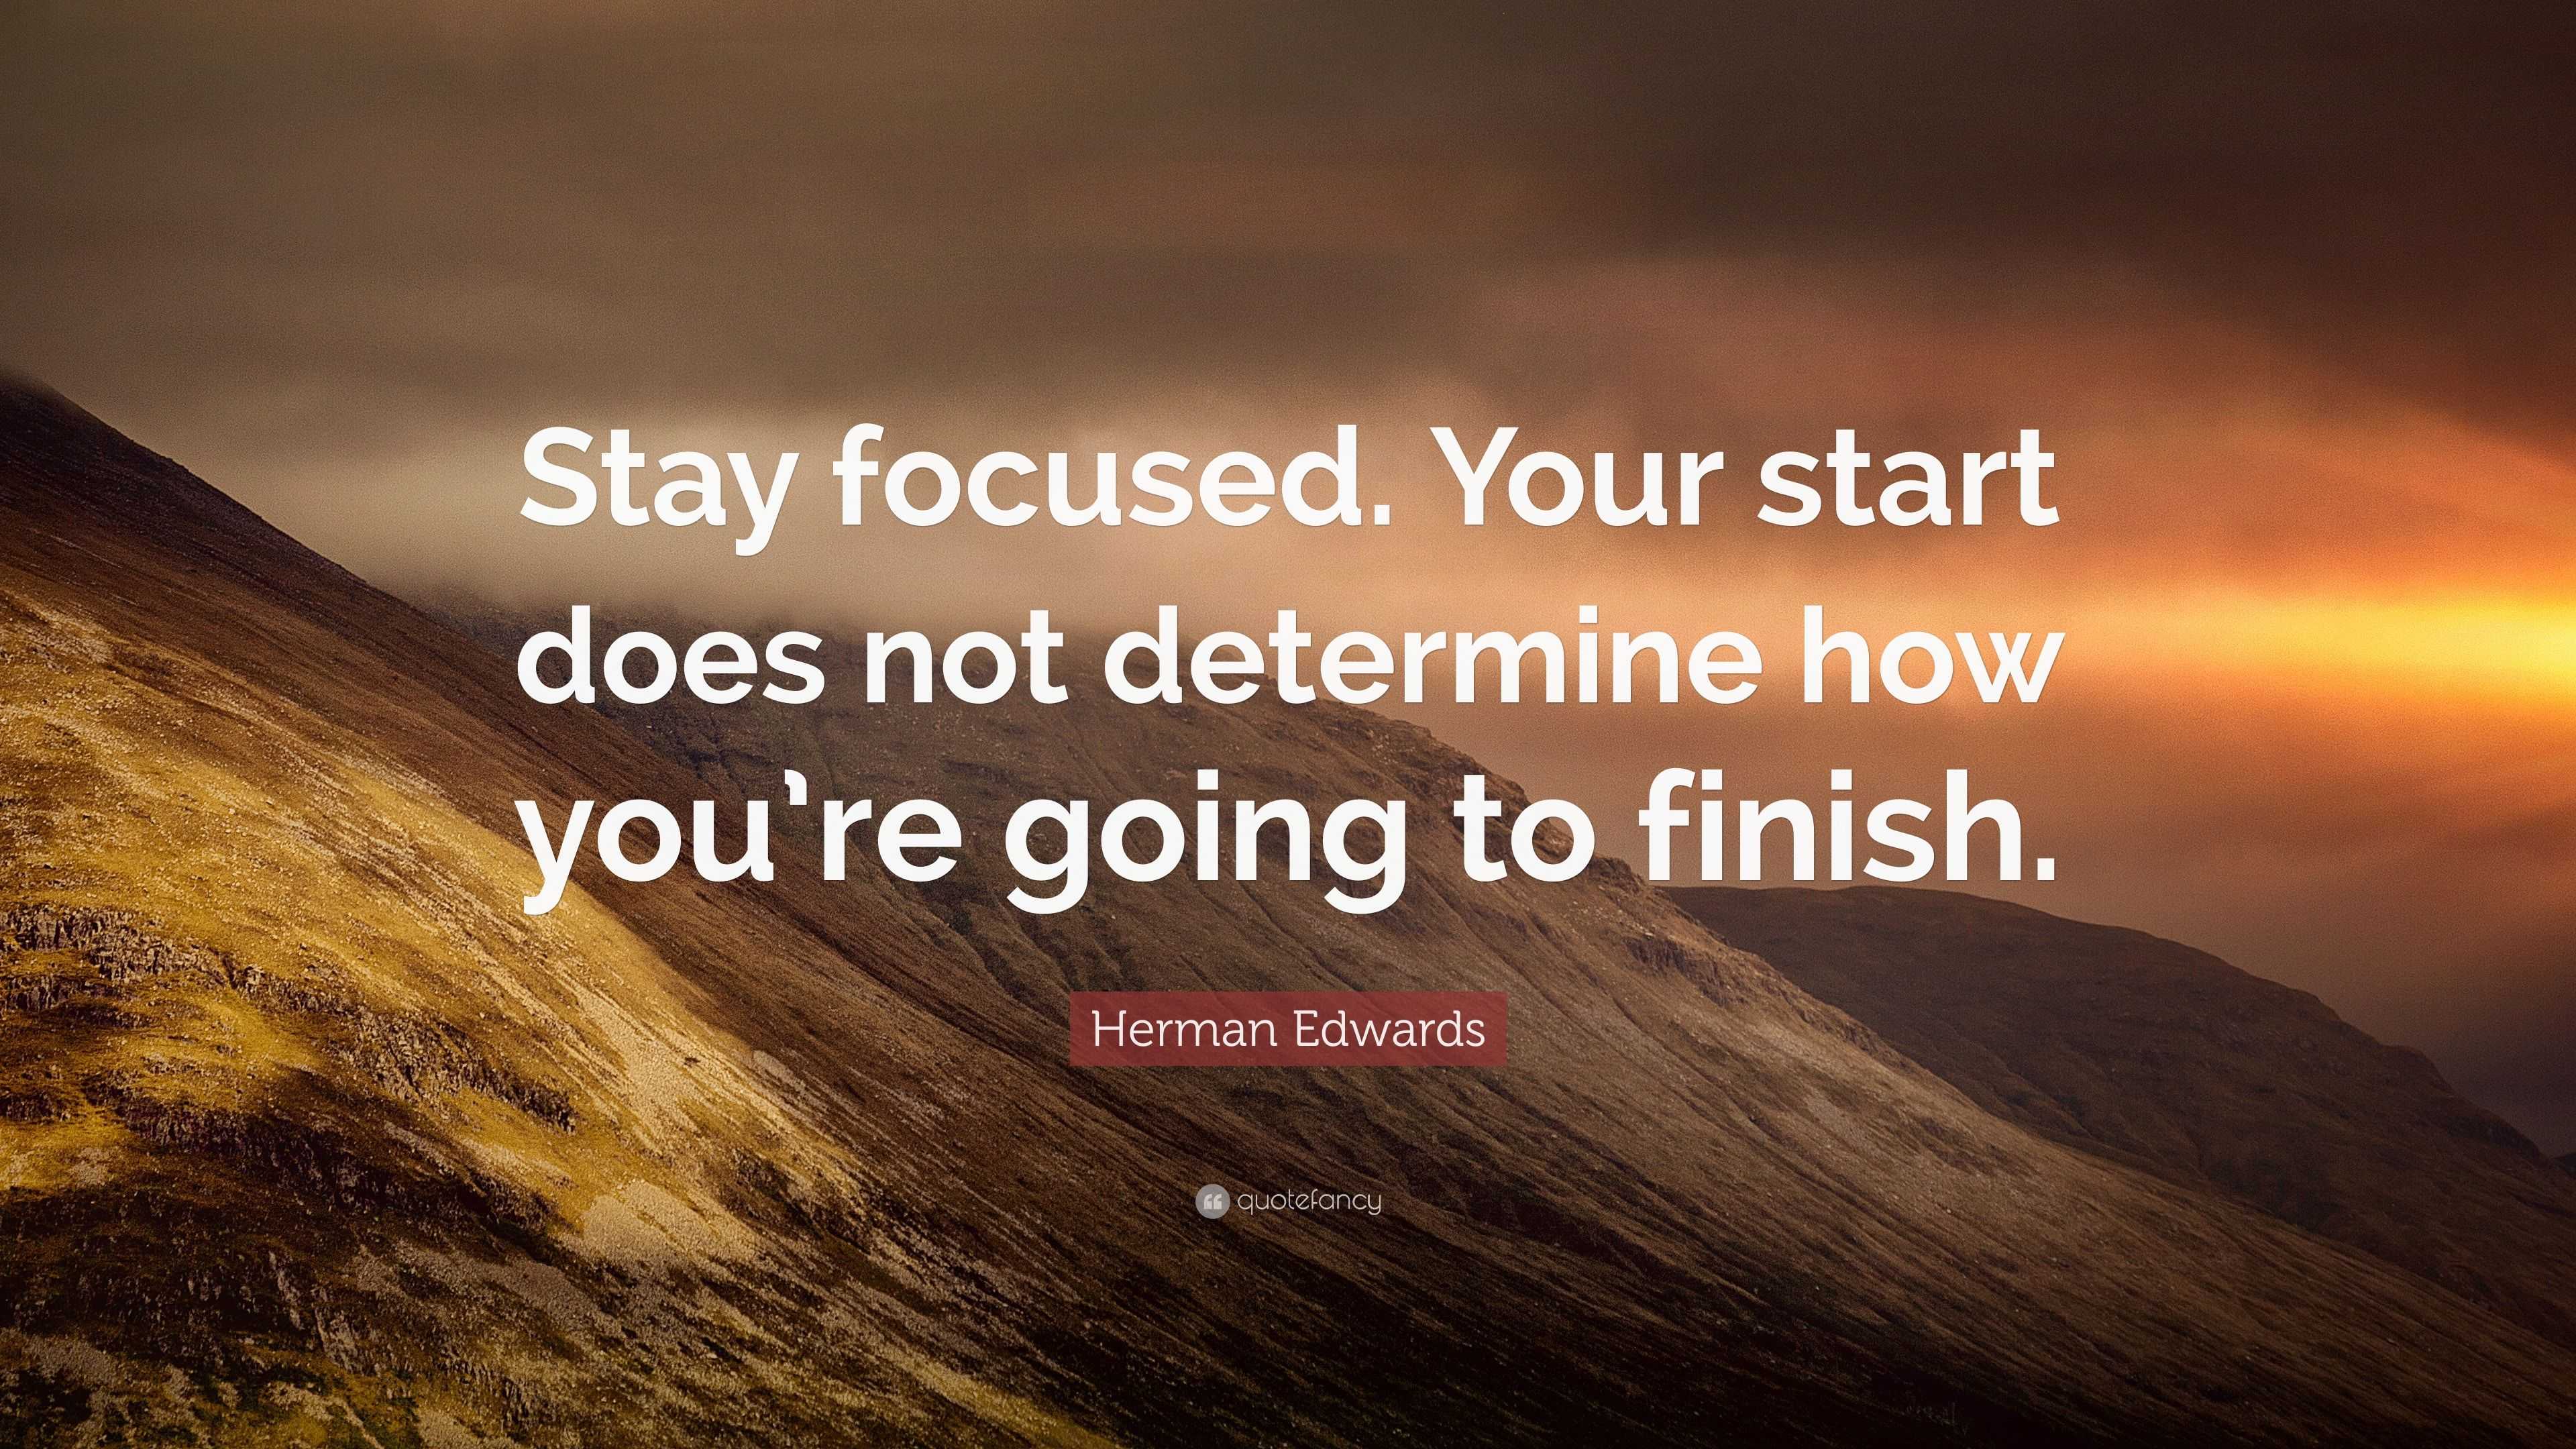 Herman Edwards Quote: “Stay focused. Your start does not determine how